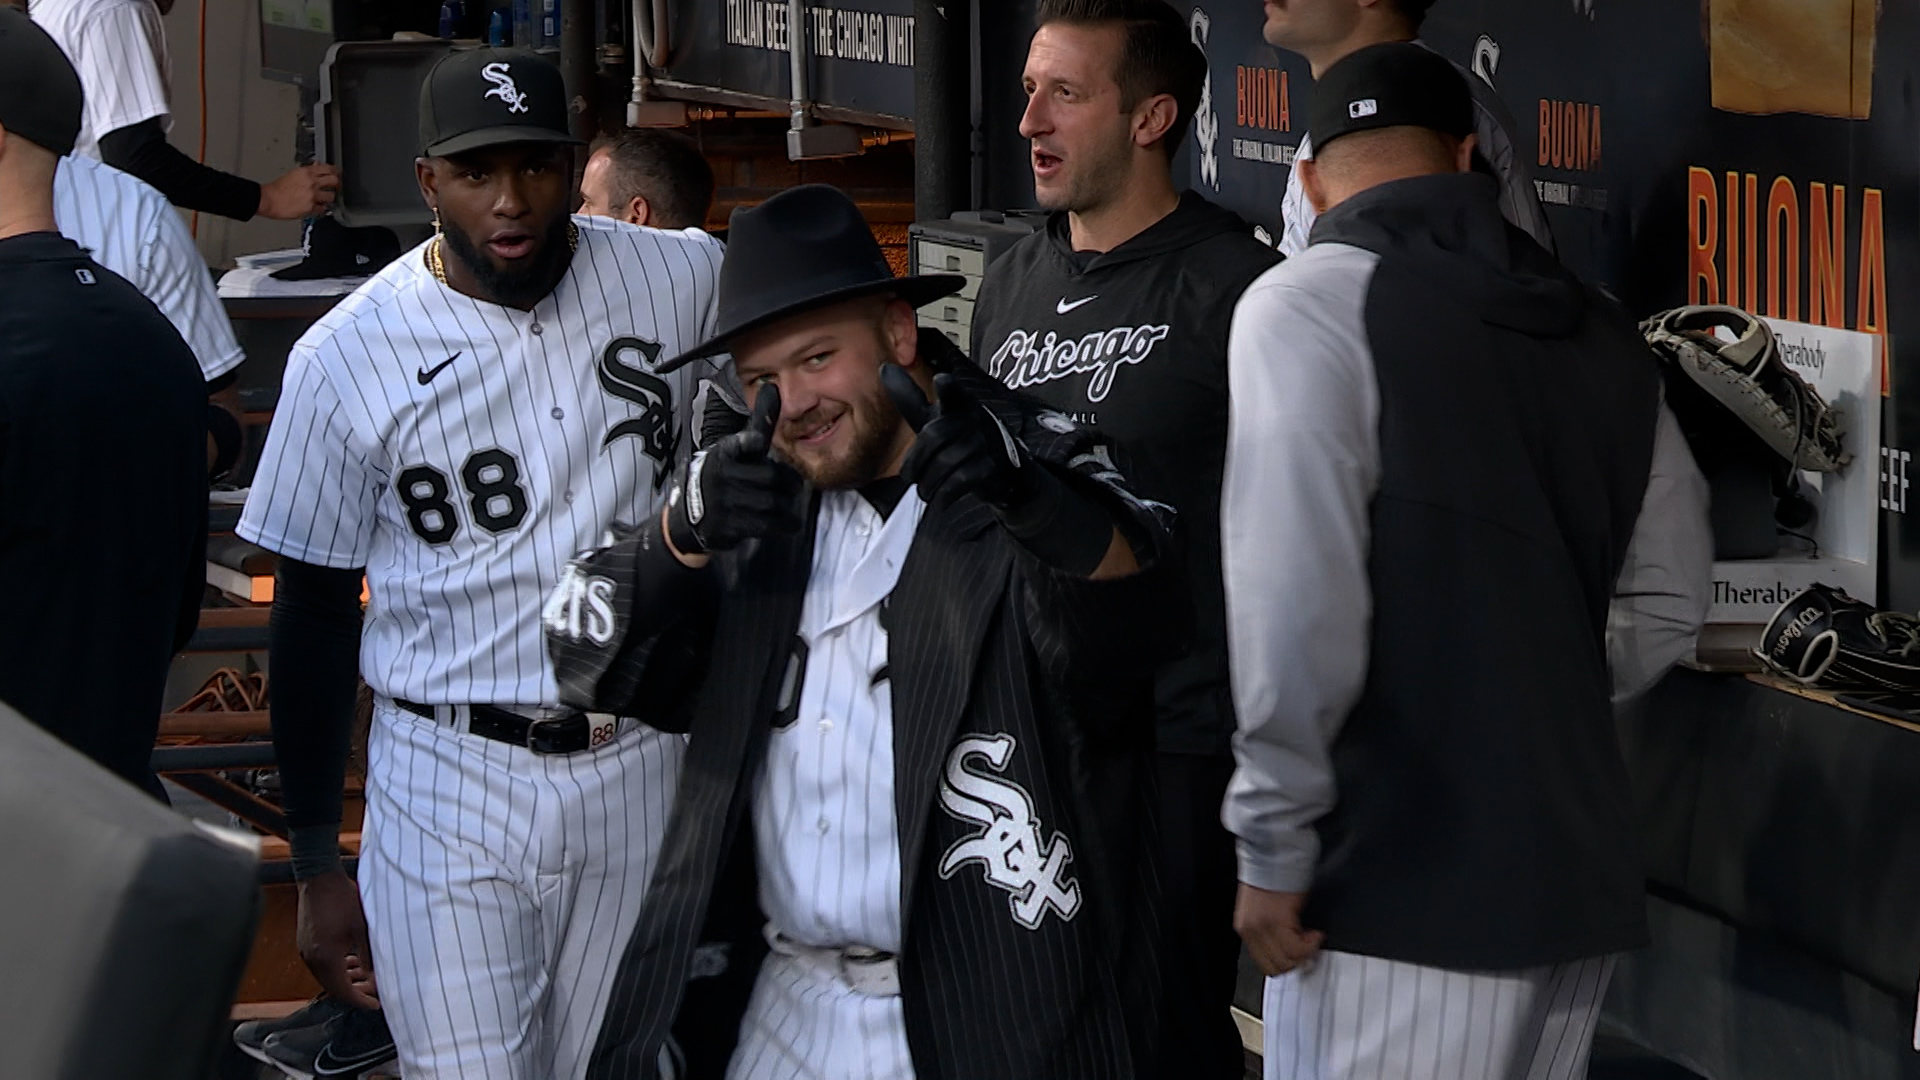 Burger debuts 'Chicago mobster' home run celebration – NBC Sports